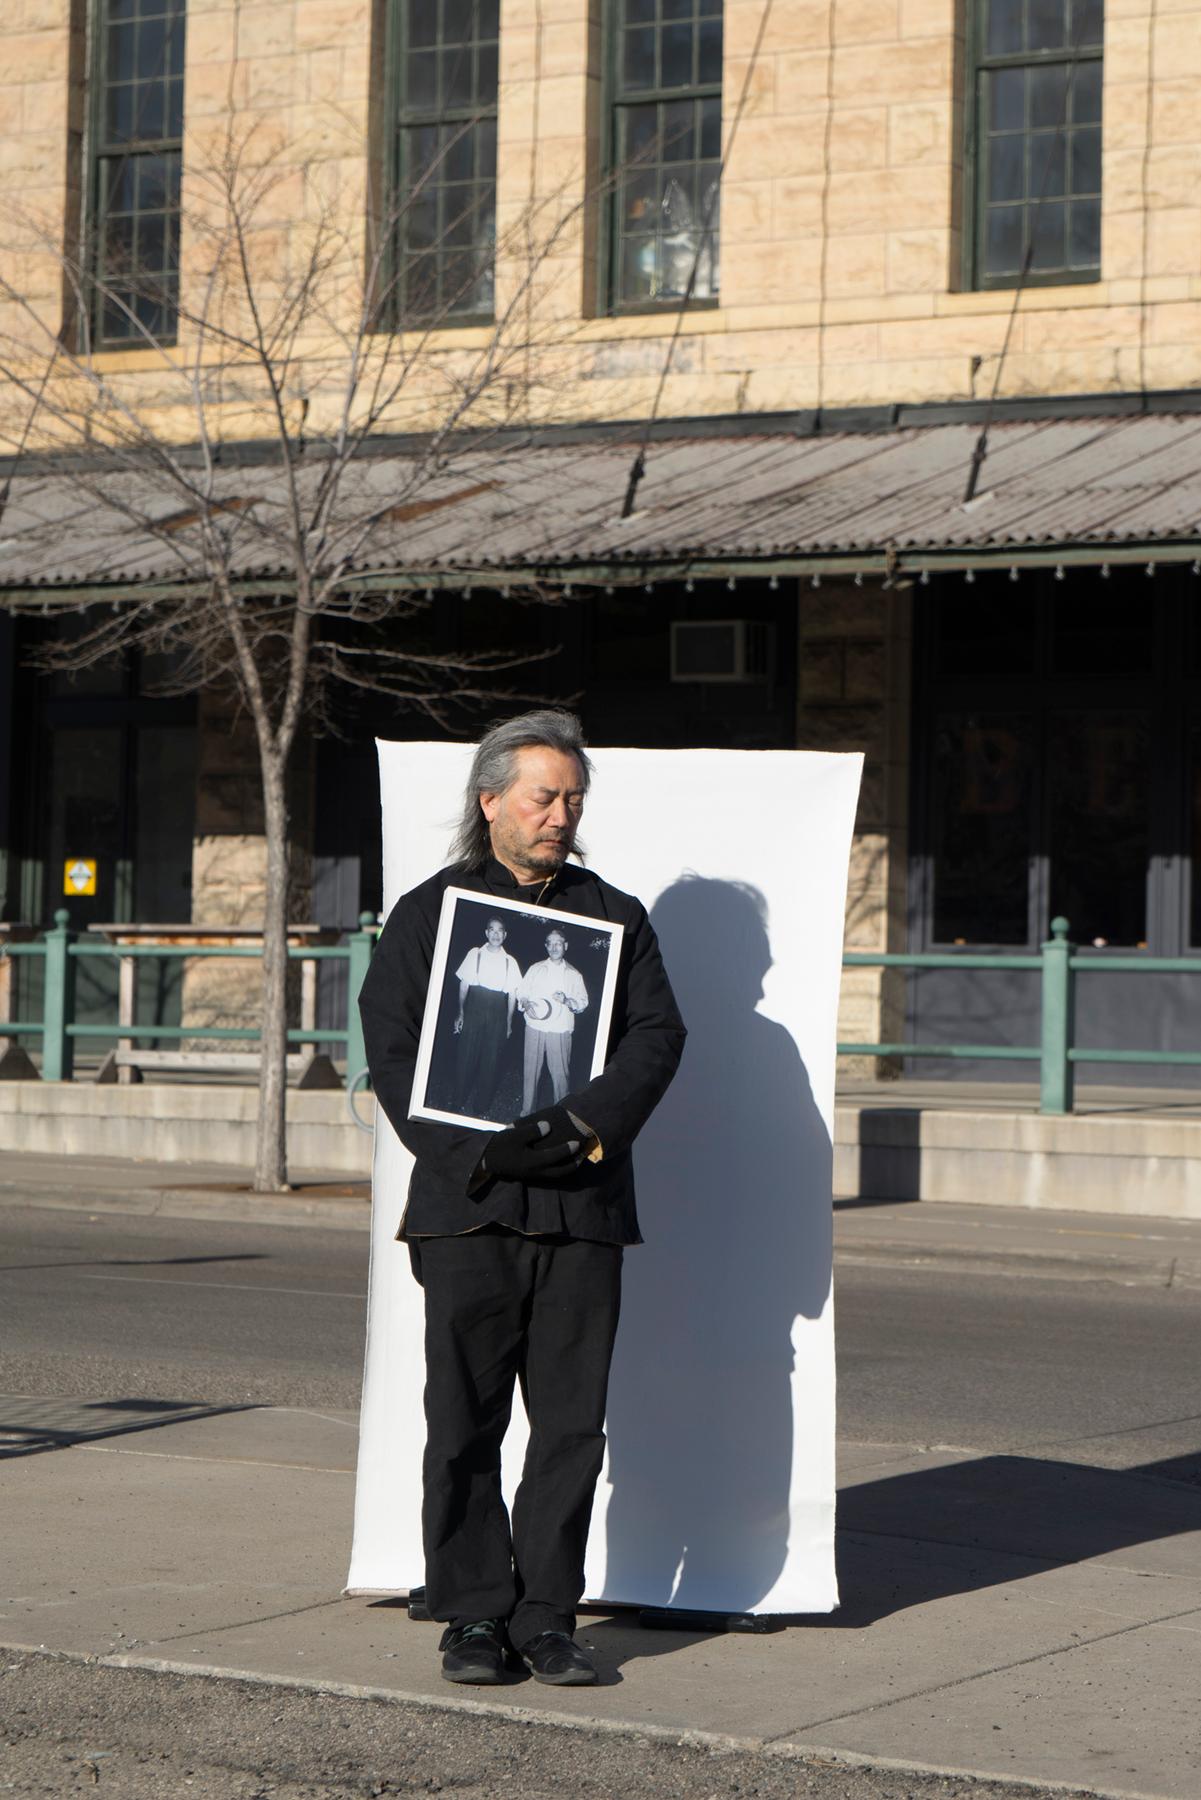 A man stands outside holding a photograph in front of a white sheet